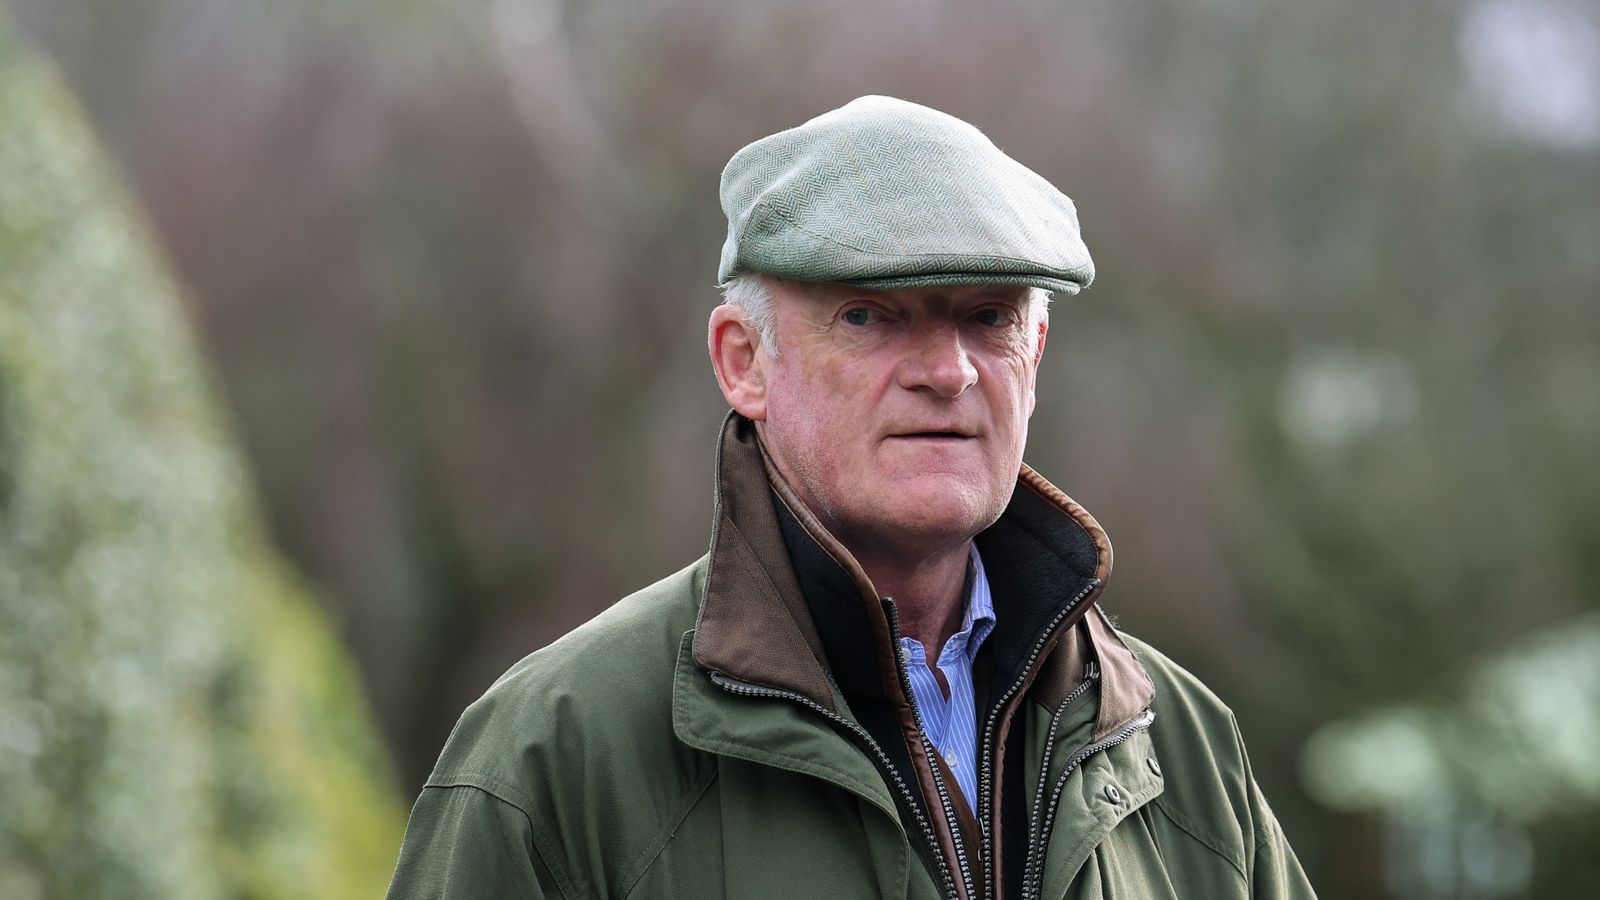 Whip rule changes: Trainer Willie Mullins calls on BHA to delay new guidelines until end of jumps season